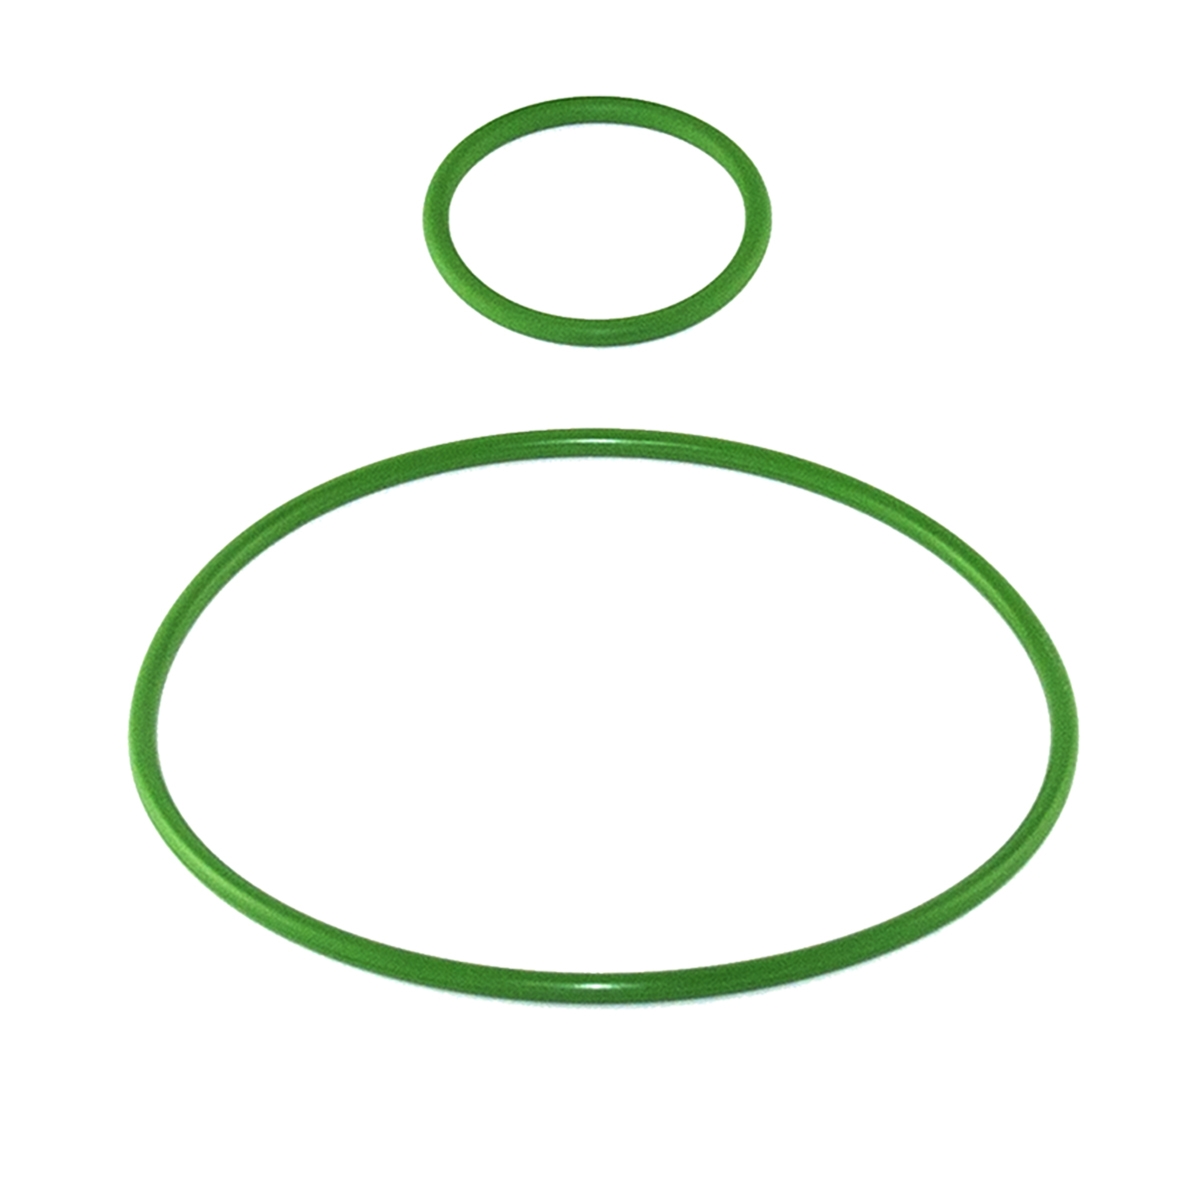 Two green O-rings laid out stock image